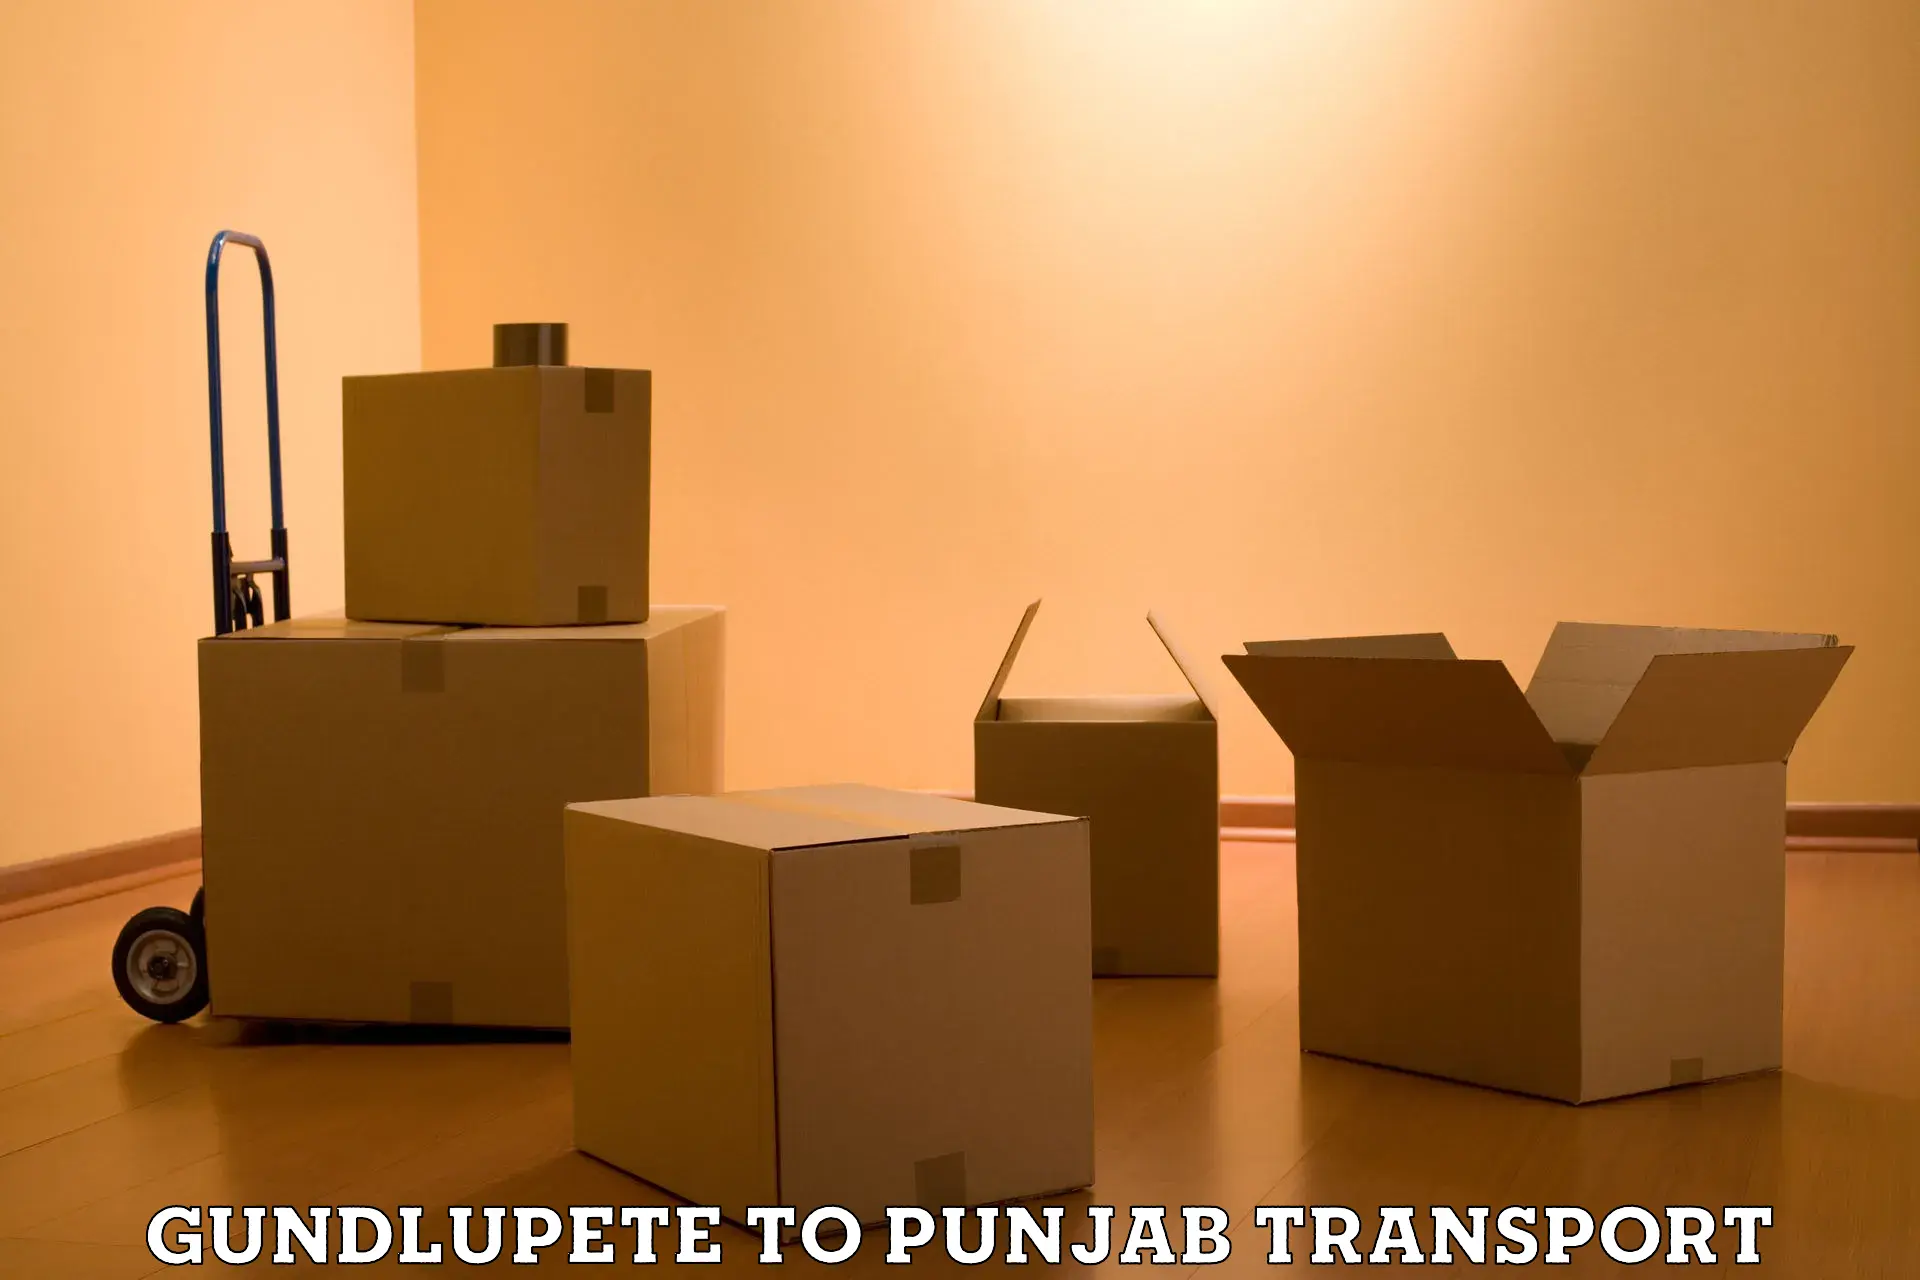 Delivery service Gundlupete to Zirakpur